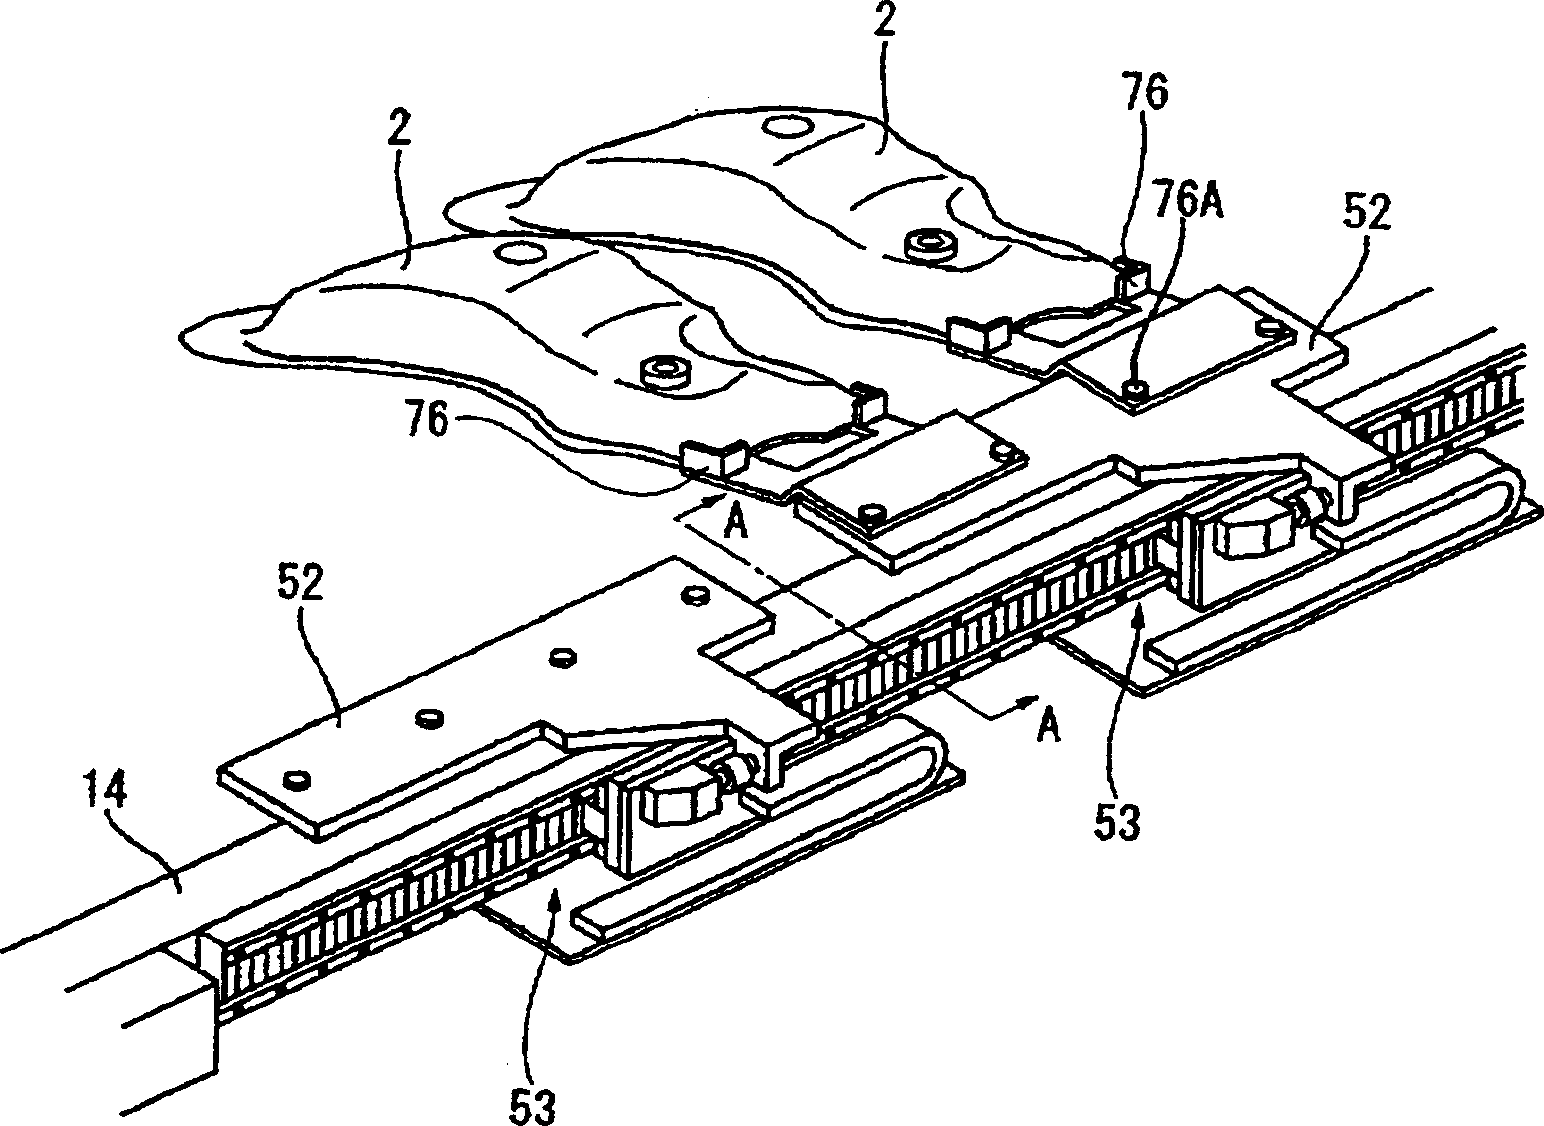 Work carrying device of pressing machine